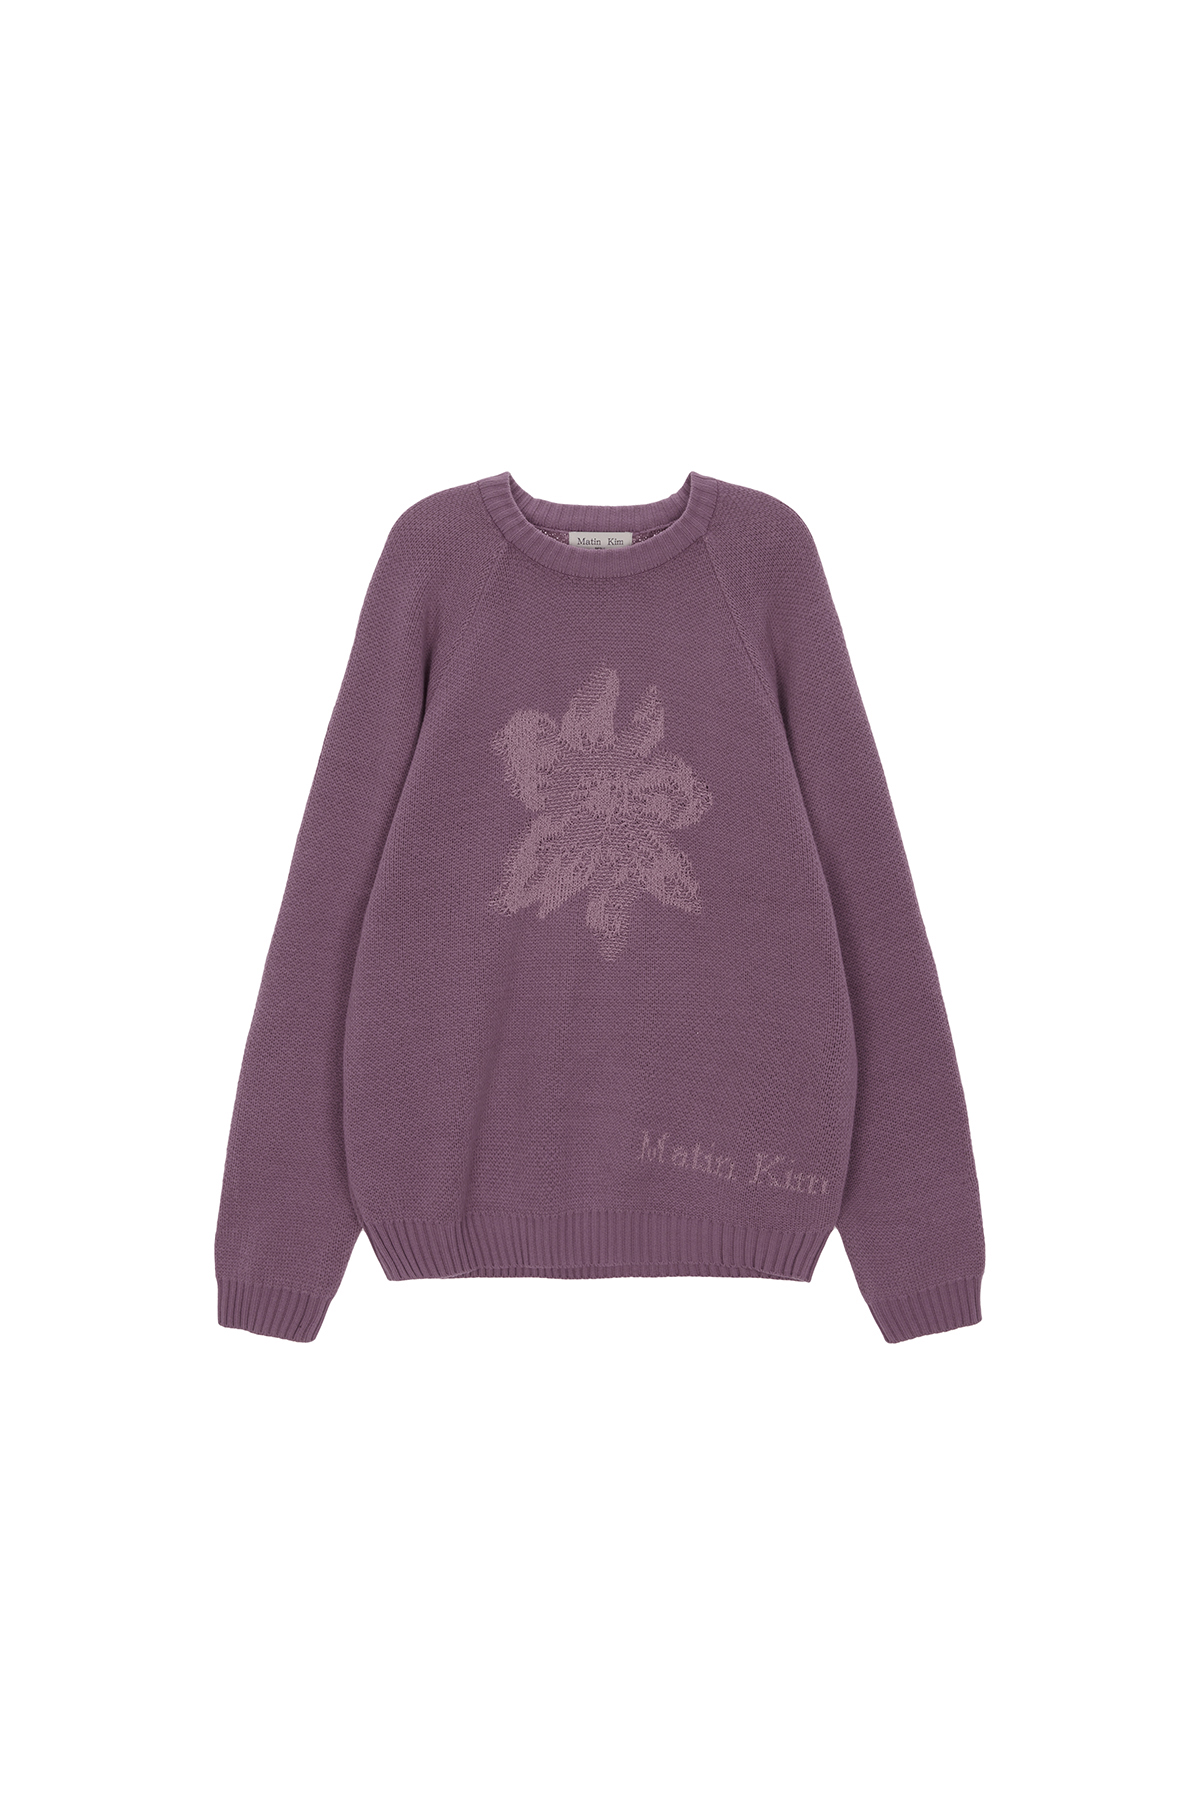 FLOWER JACQUARD KNIT PULLOVER IN INDIAN PINK